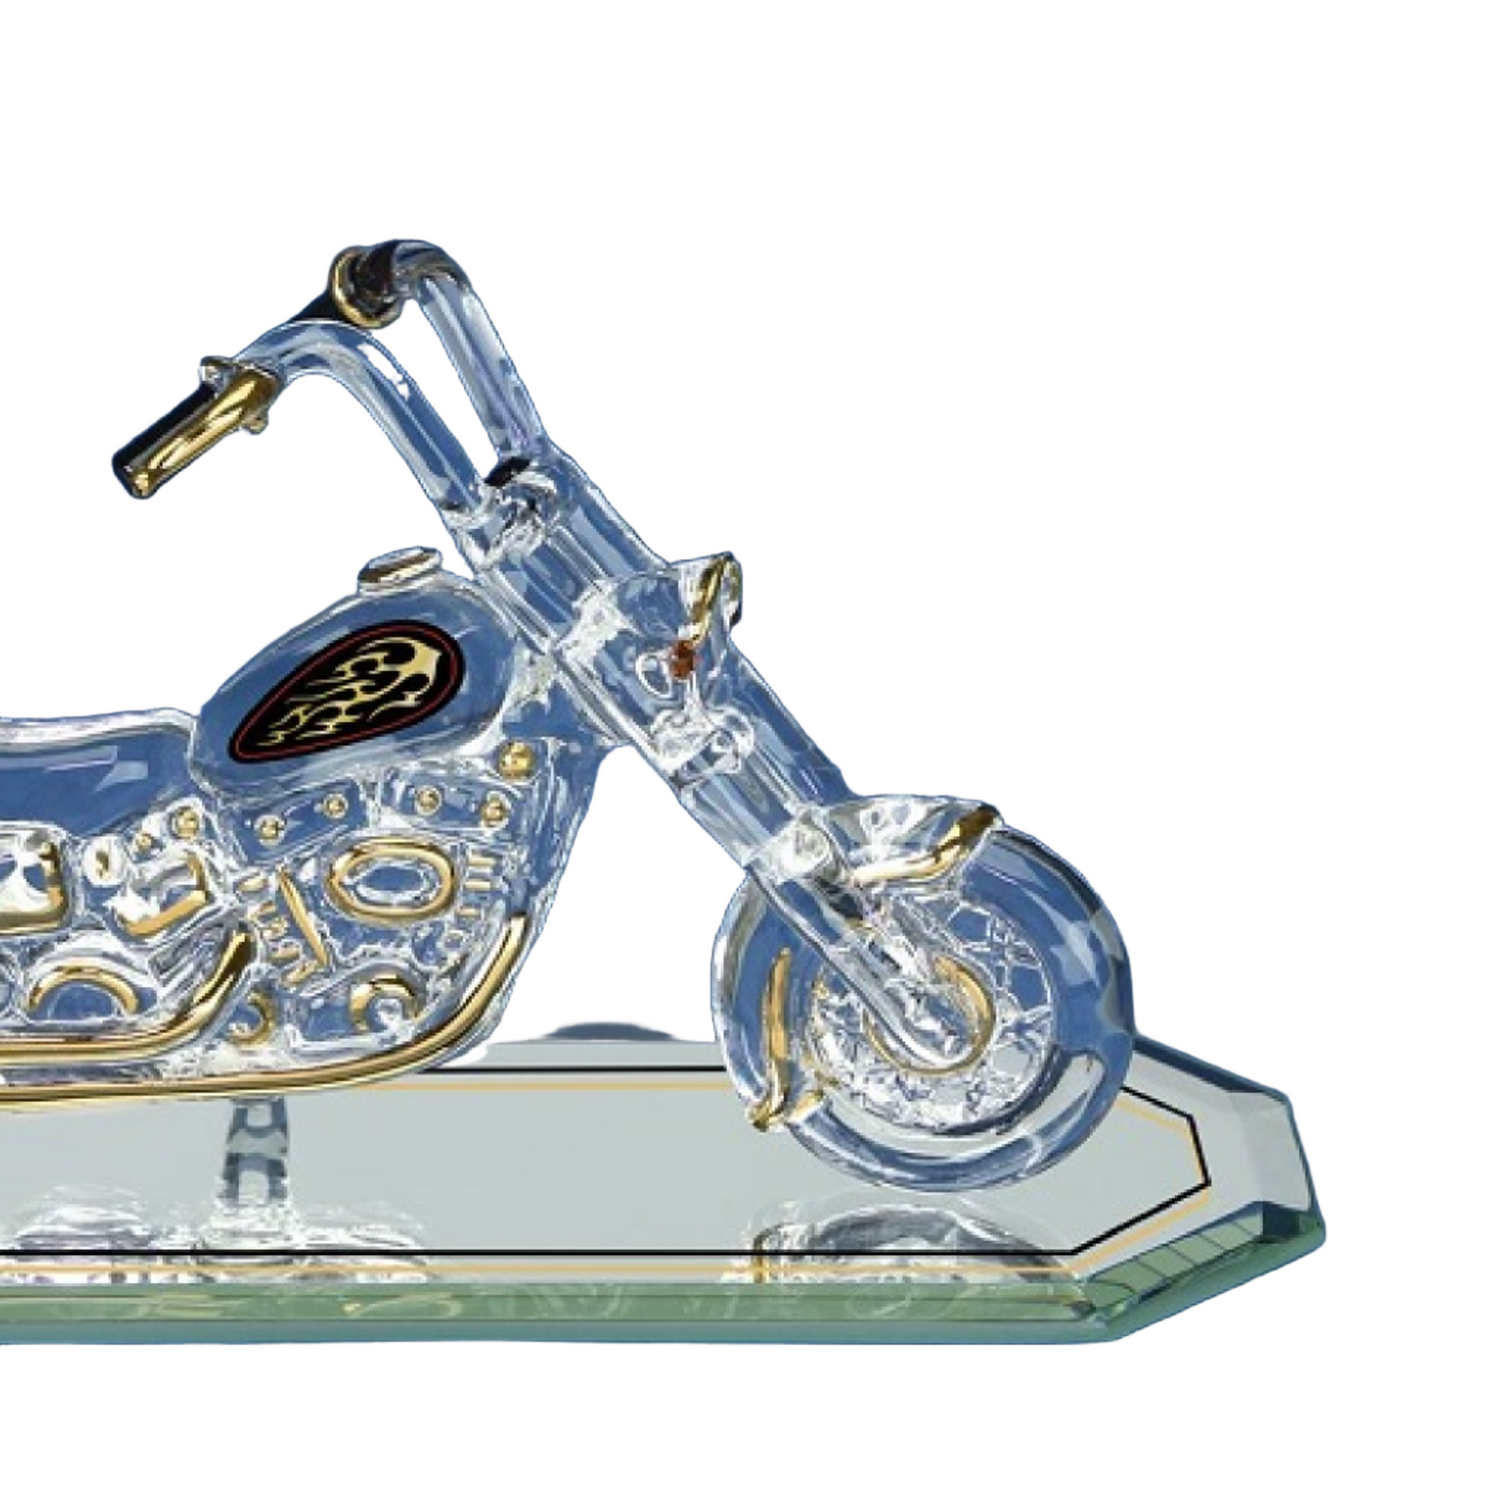 Glass Baron Motorcycle "The Outlaw"